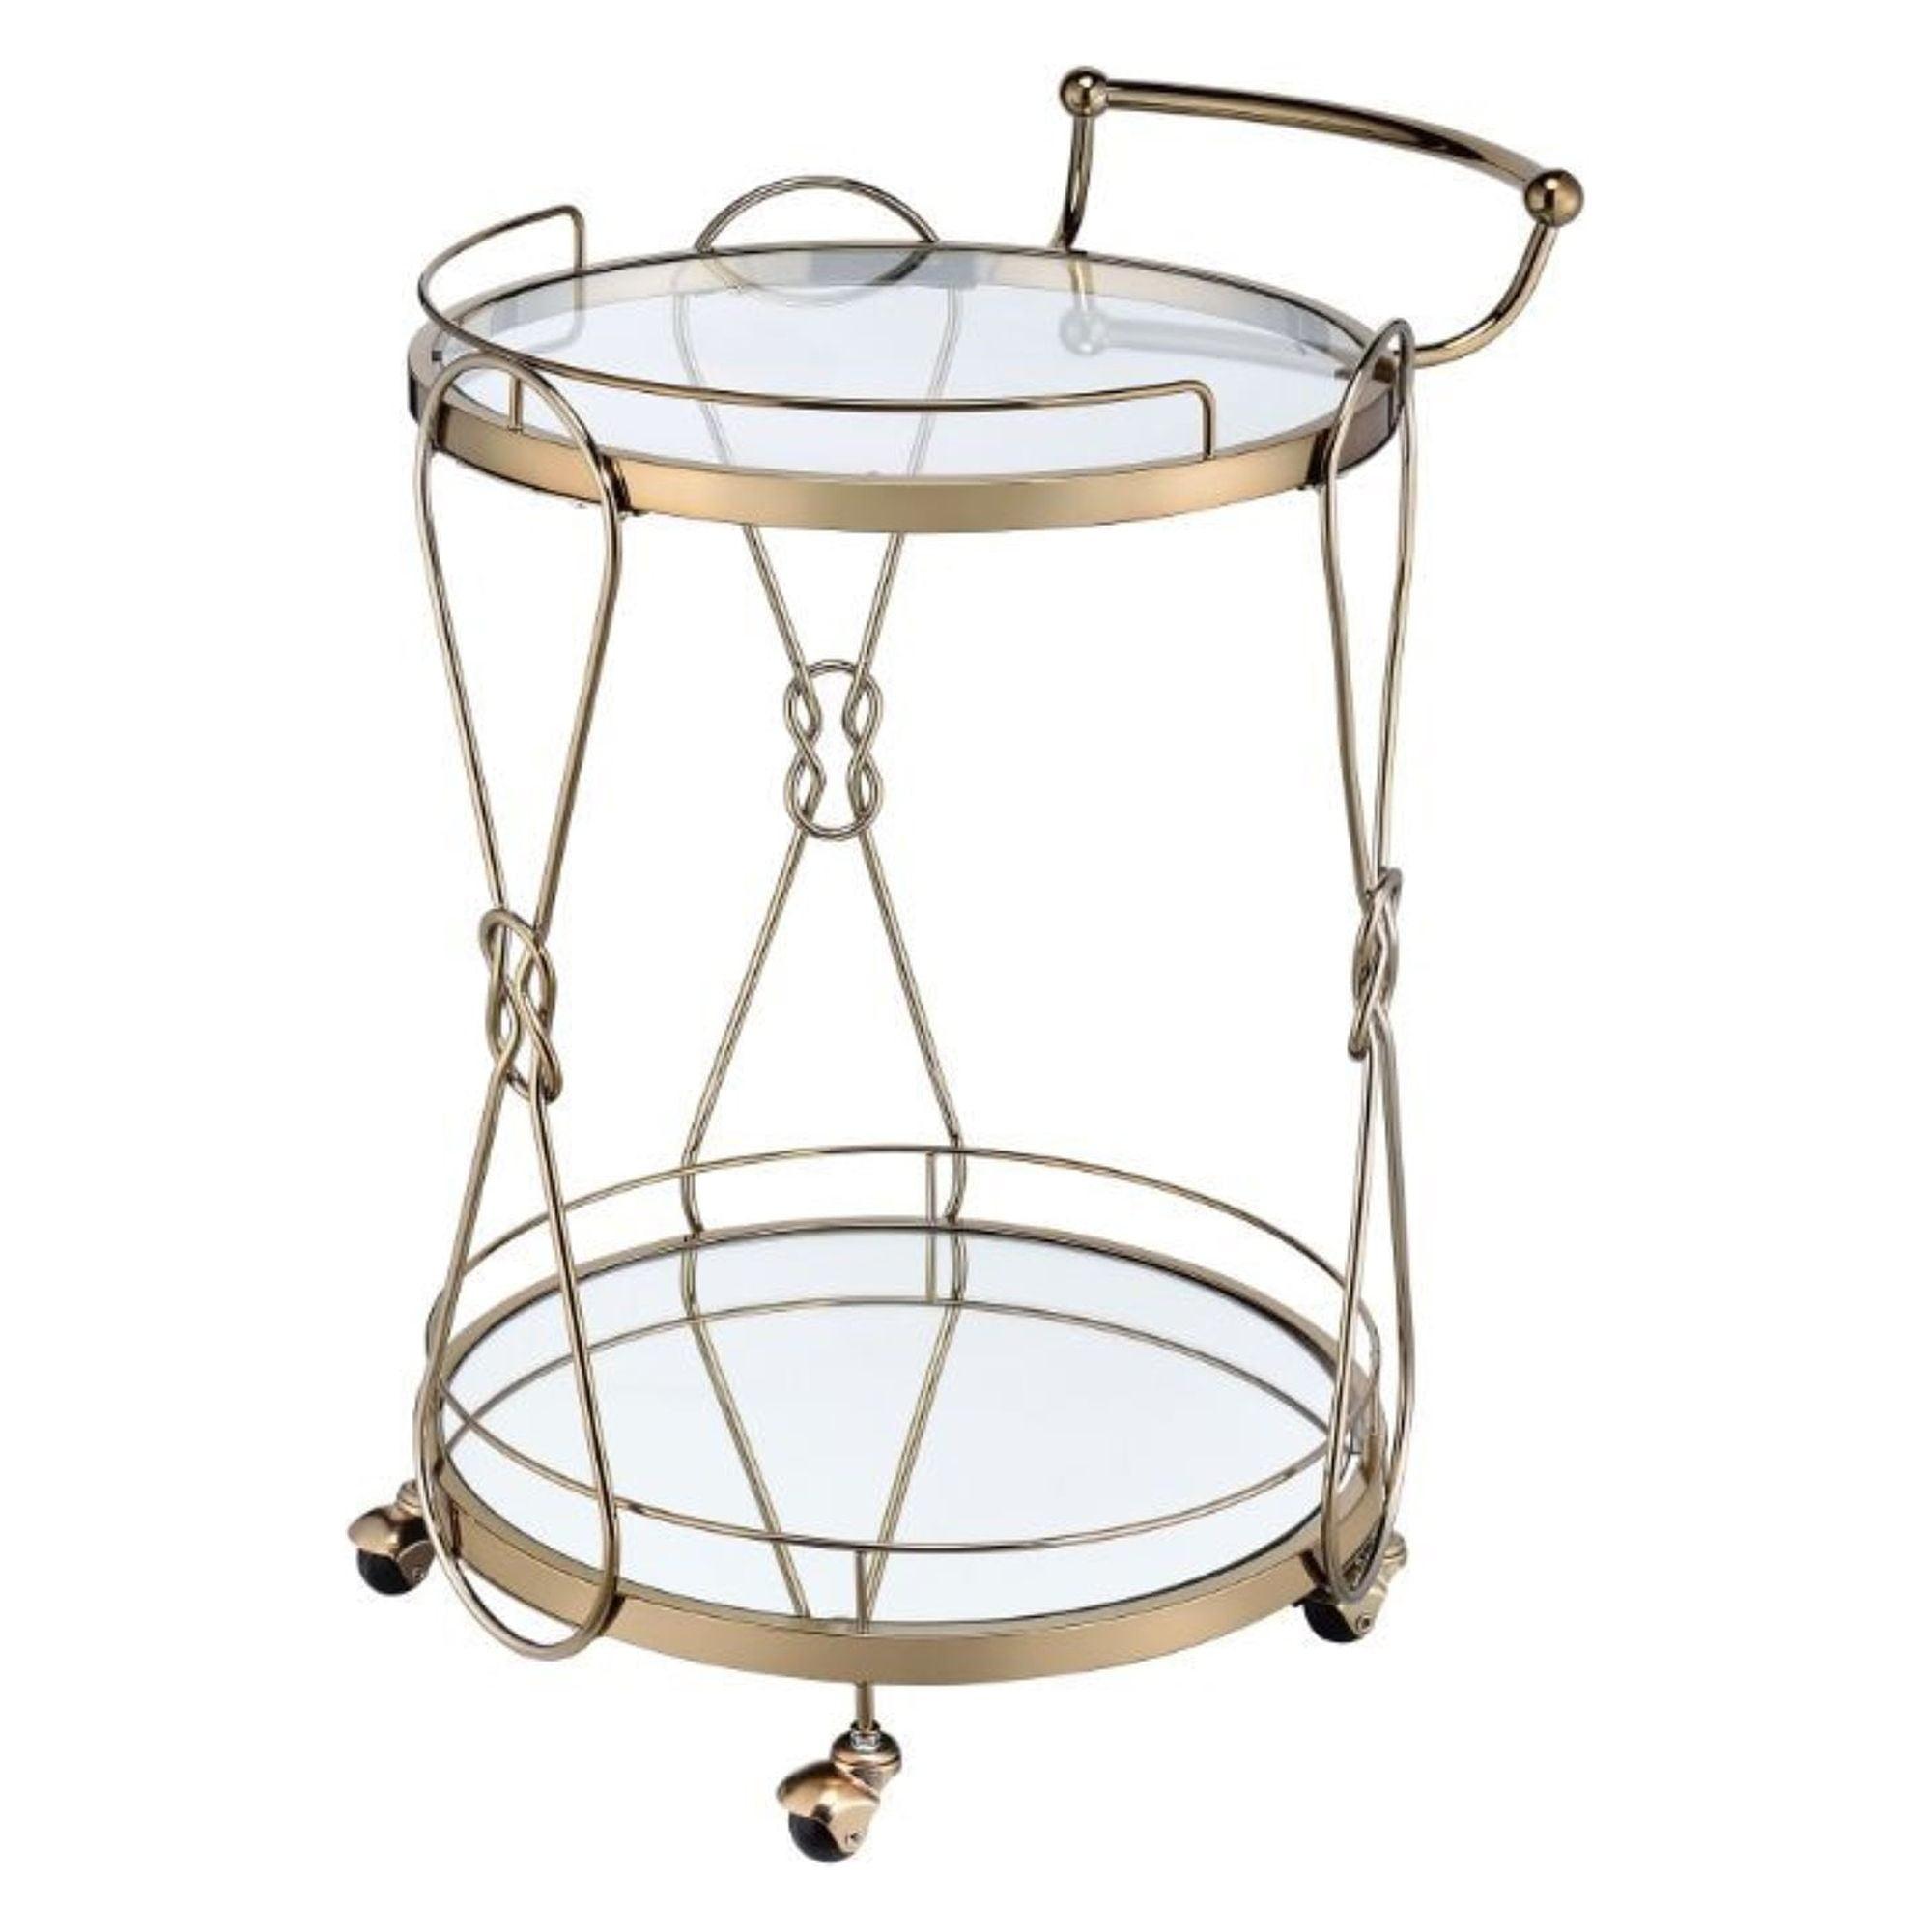 Chic Champagne Round Serving Cart with Glass Shelves and Locking Casters